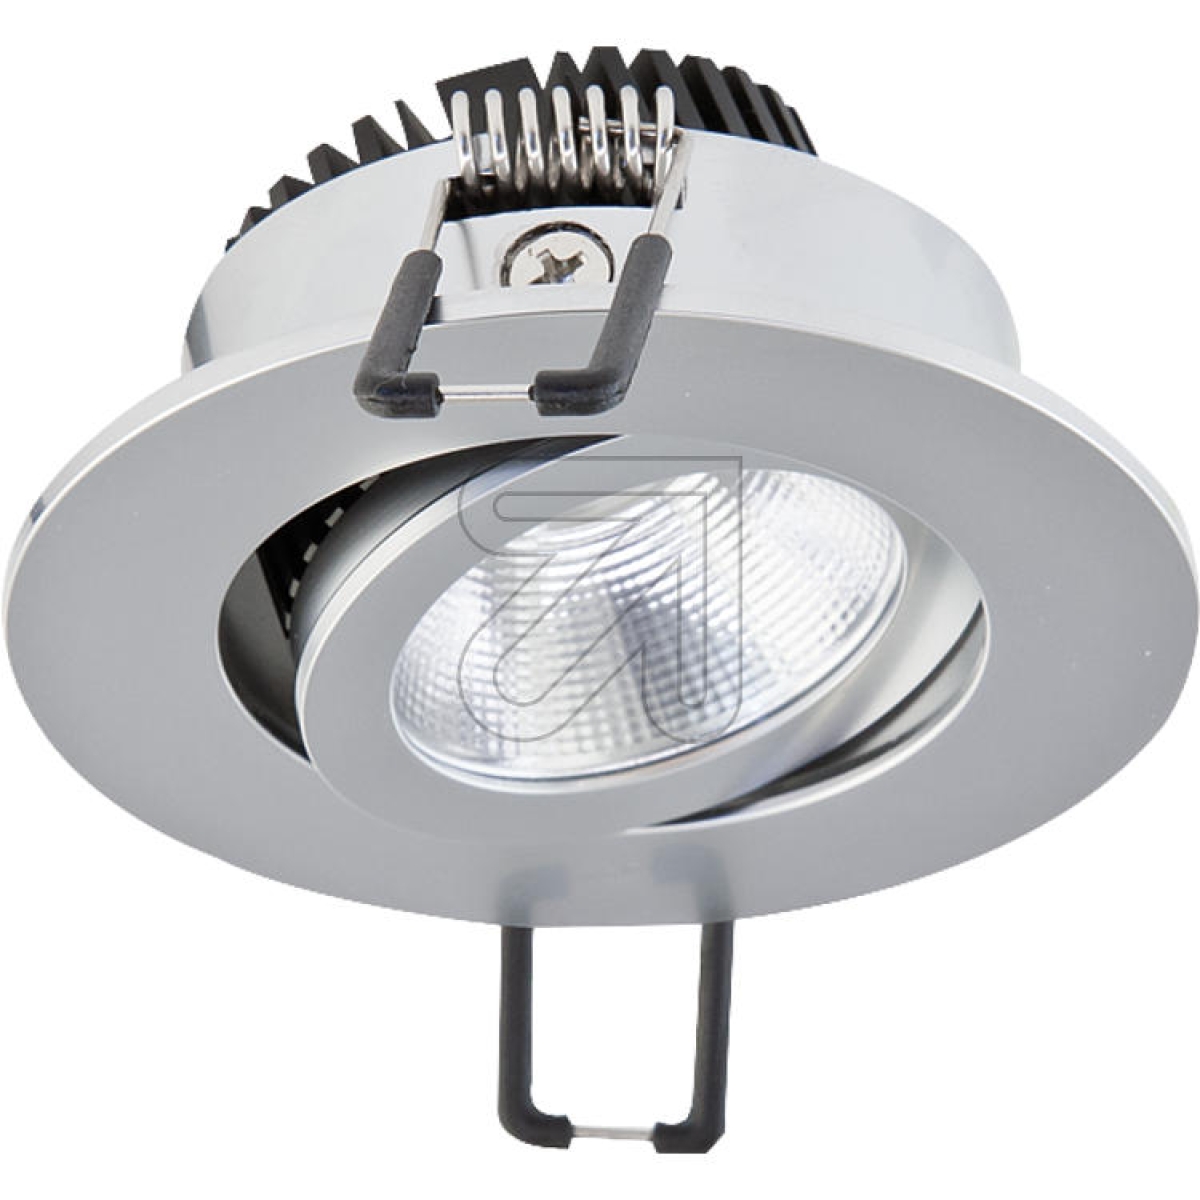 EVNLED recessed spotlight Ra>95, Dim-2-warm, 6W, chrome-metal. 230V, beam angle 38°, swiveling, PC20N615D2WArticle-No: 679165